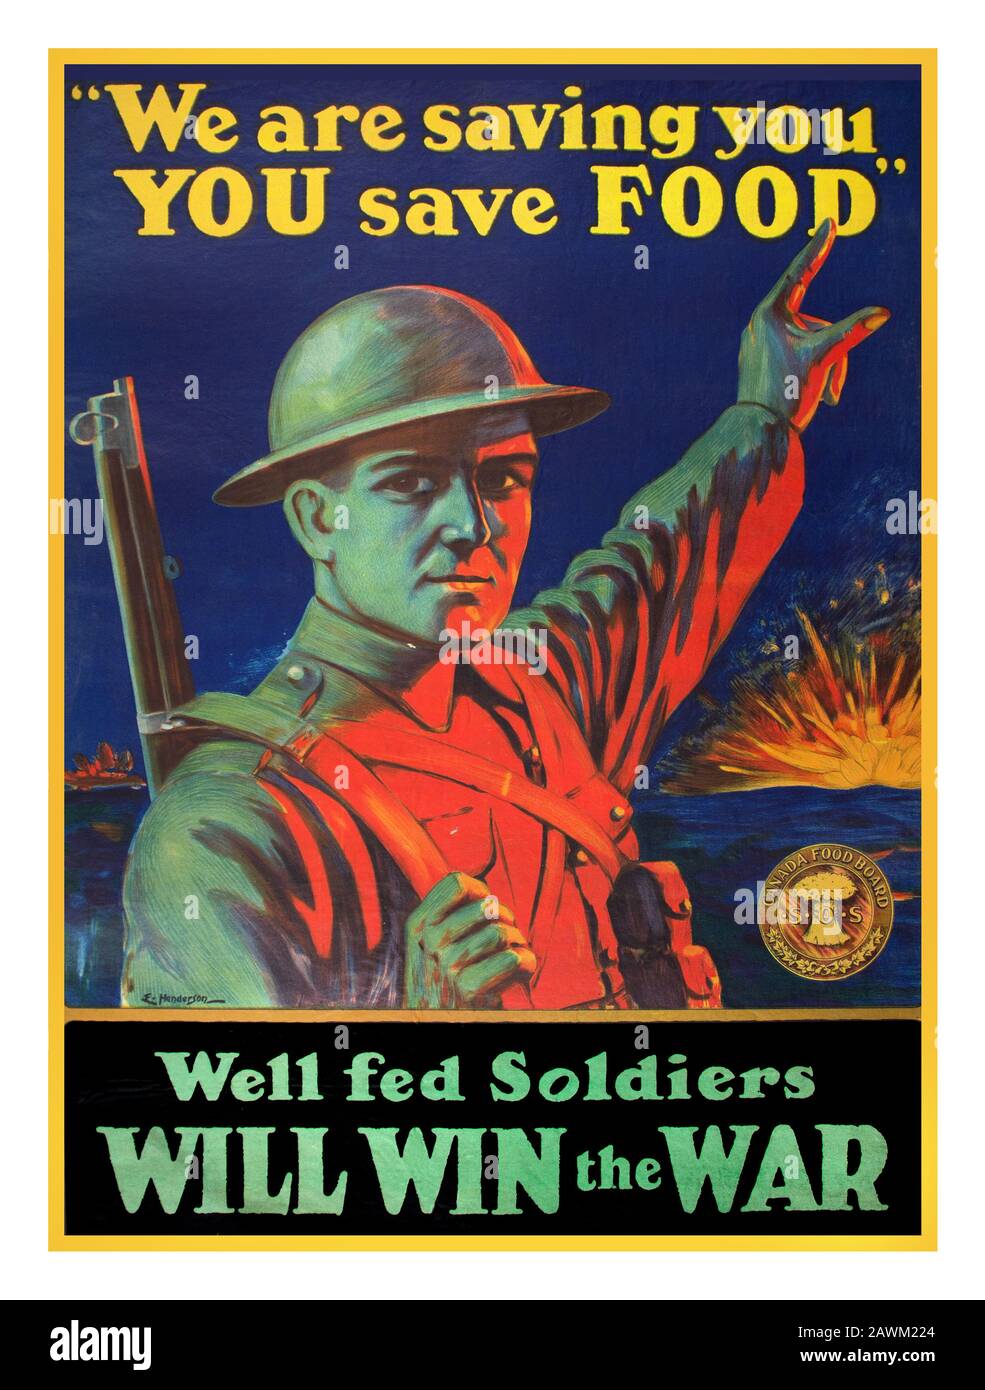 Vintage 1914-1918 Food Rationing American WWI propaganda poster regarding rationing, 'We are saving you, YOU save FOOD' 'Well fed soldiers WILL WIN the WAR Stock Photo